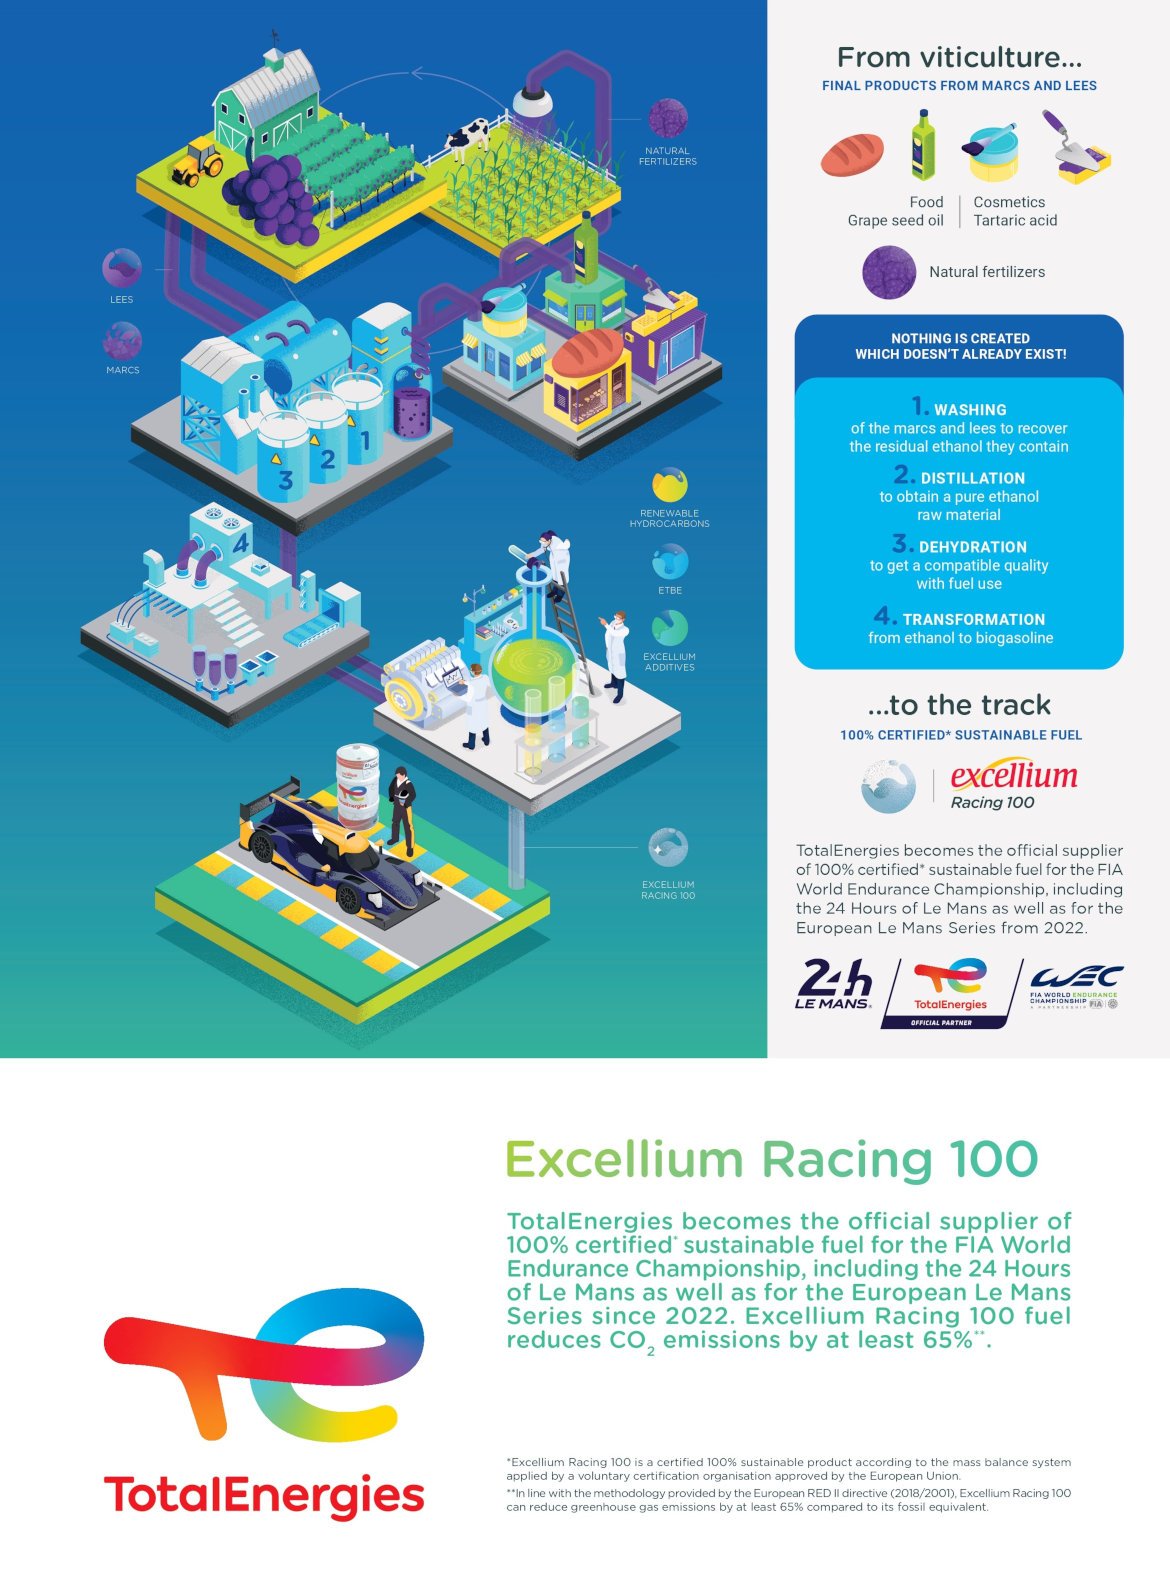 totalenergies-competition-excellium100-fev2023-veng.jpg